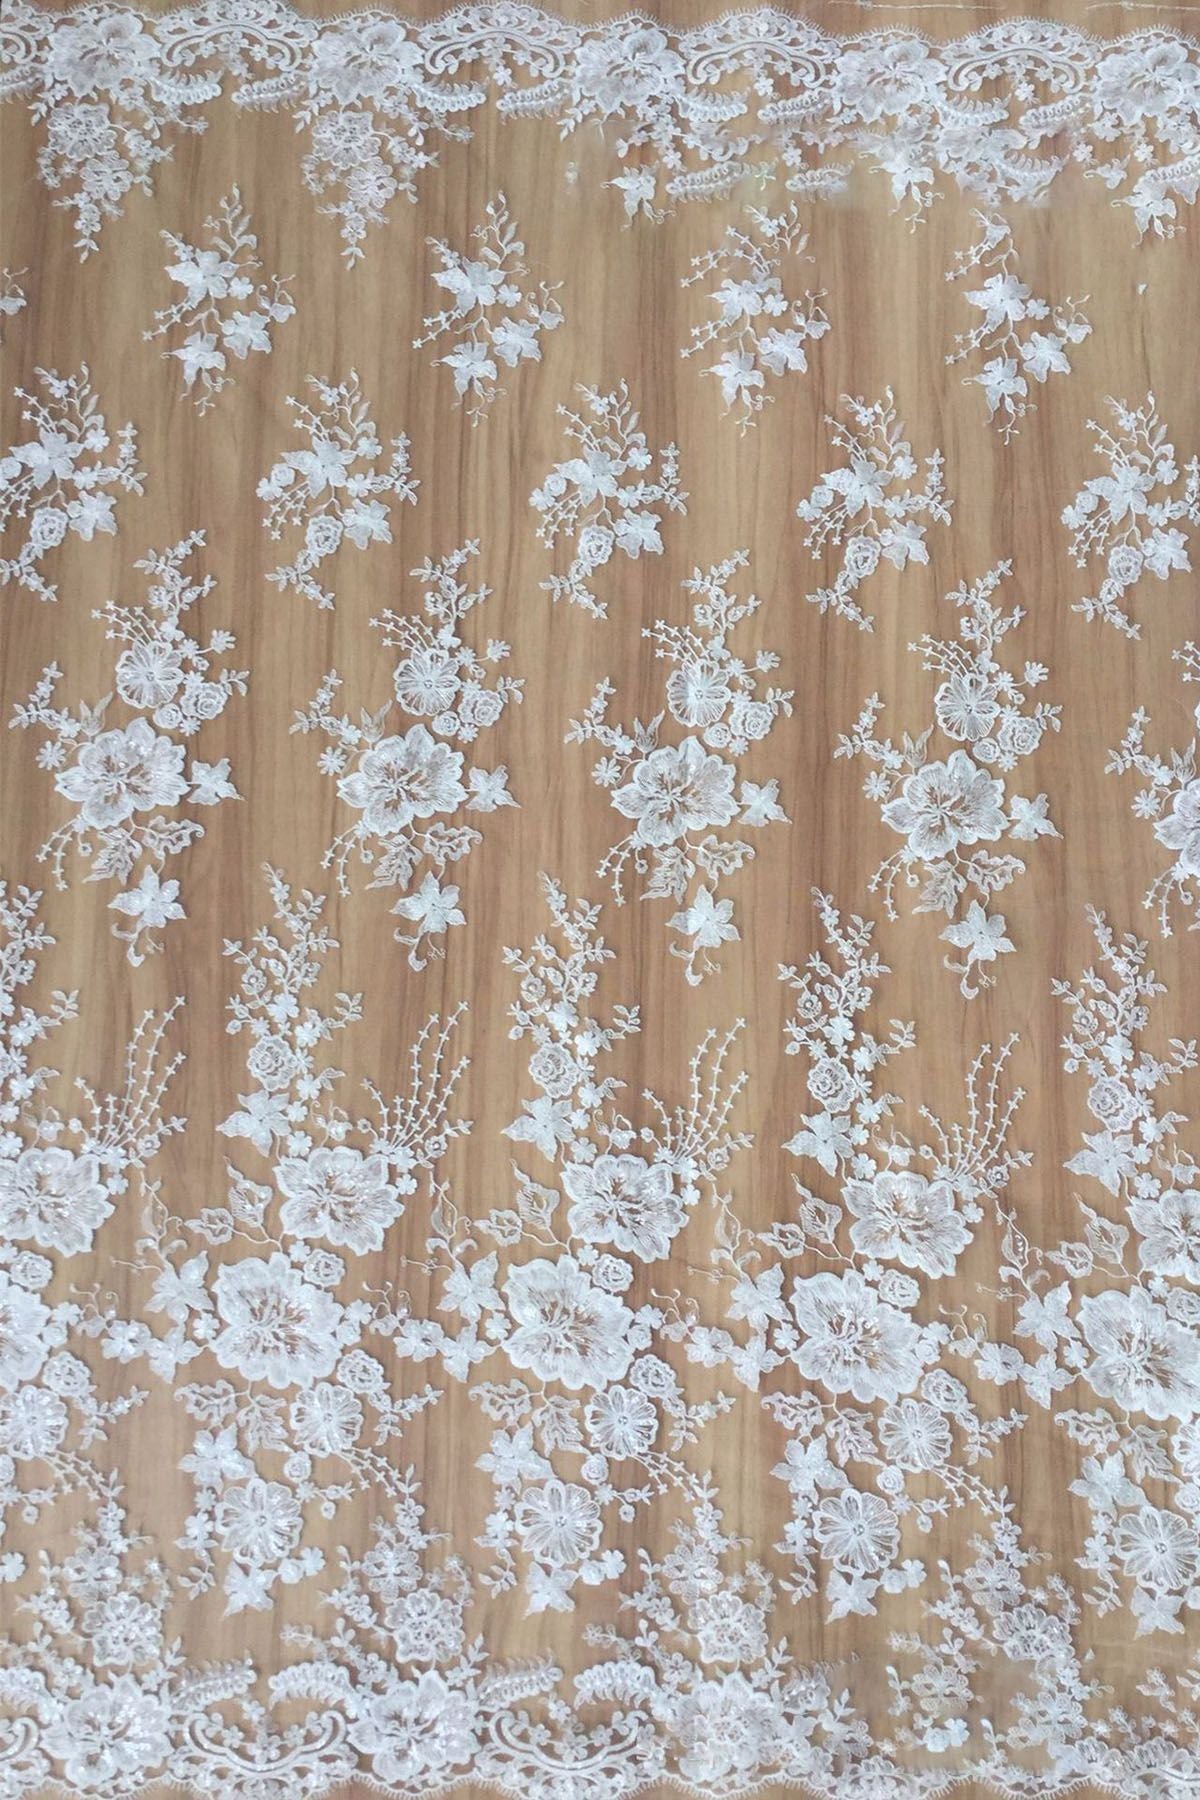 Shiny Sequined Flower Bridal Lace Fabric for Wholesale